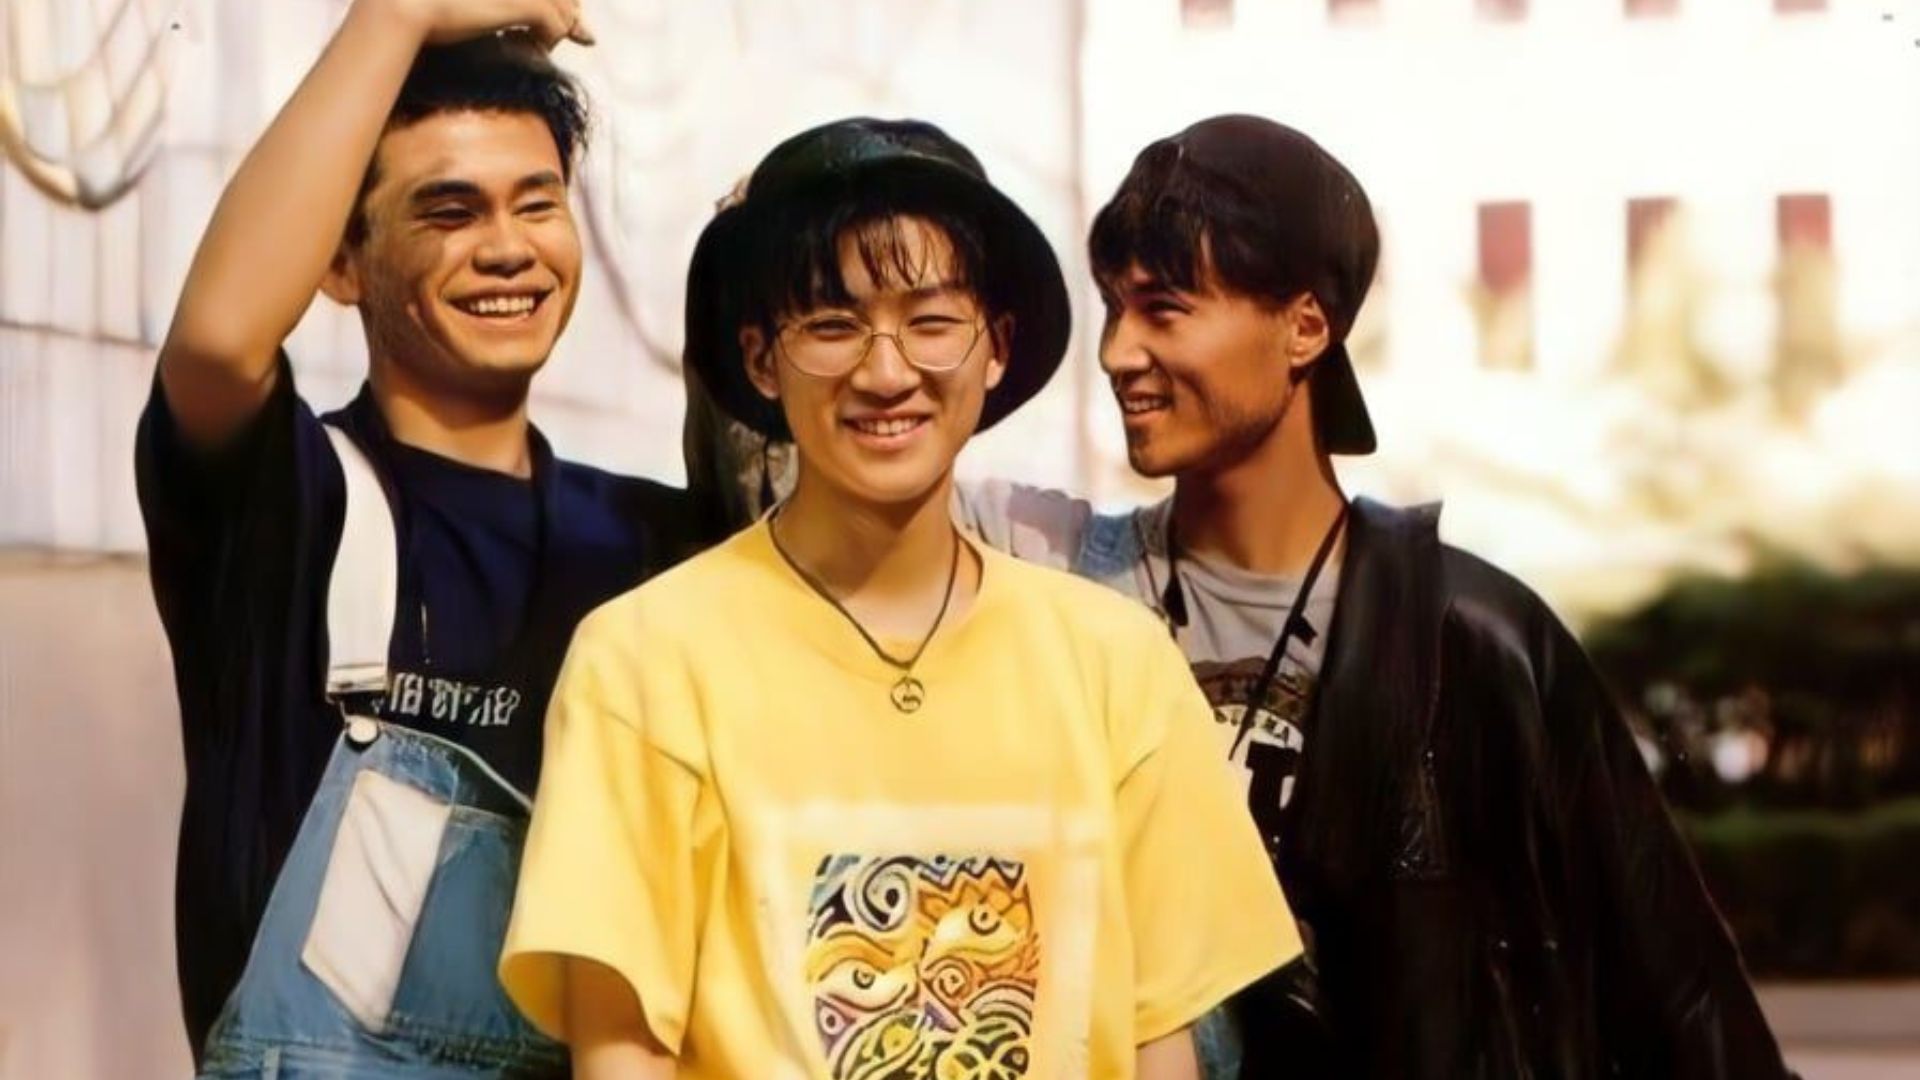 Seo Taiji and Boys: All About the Music Trio!